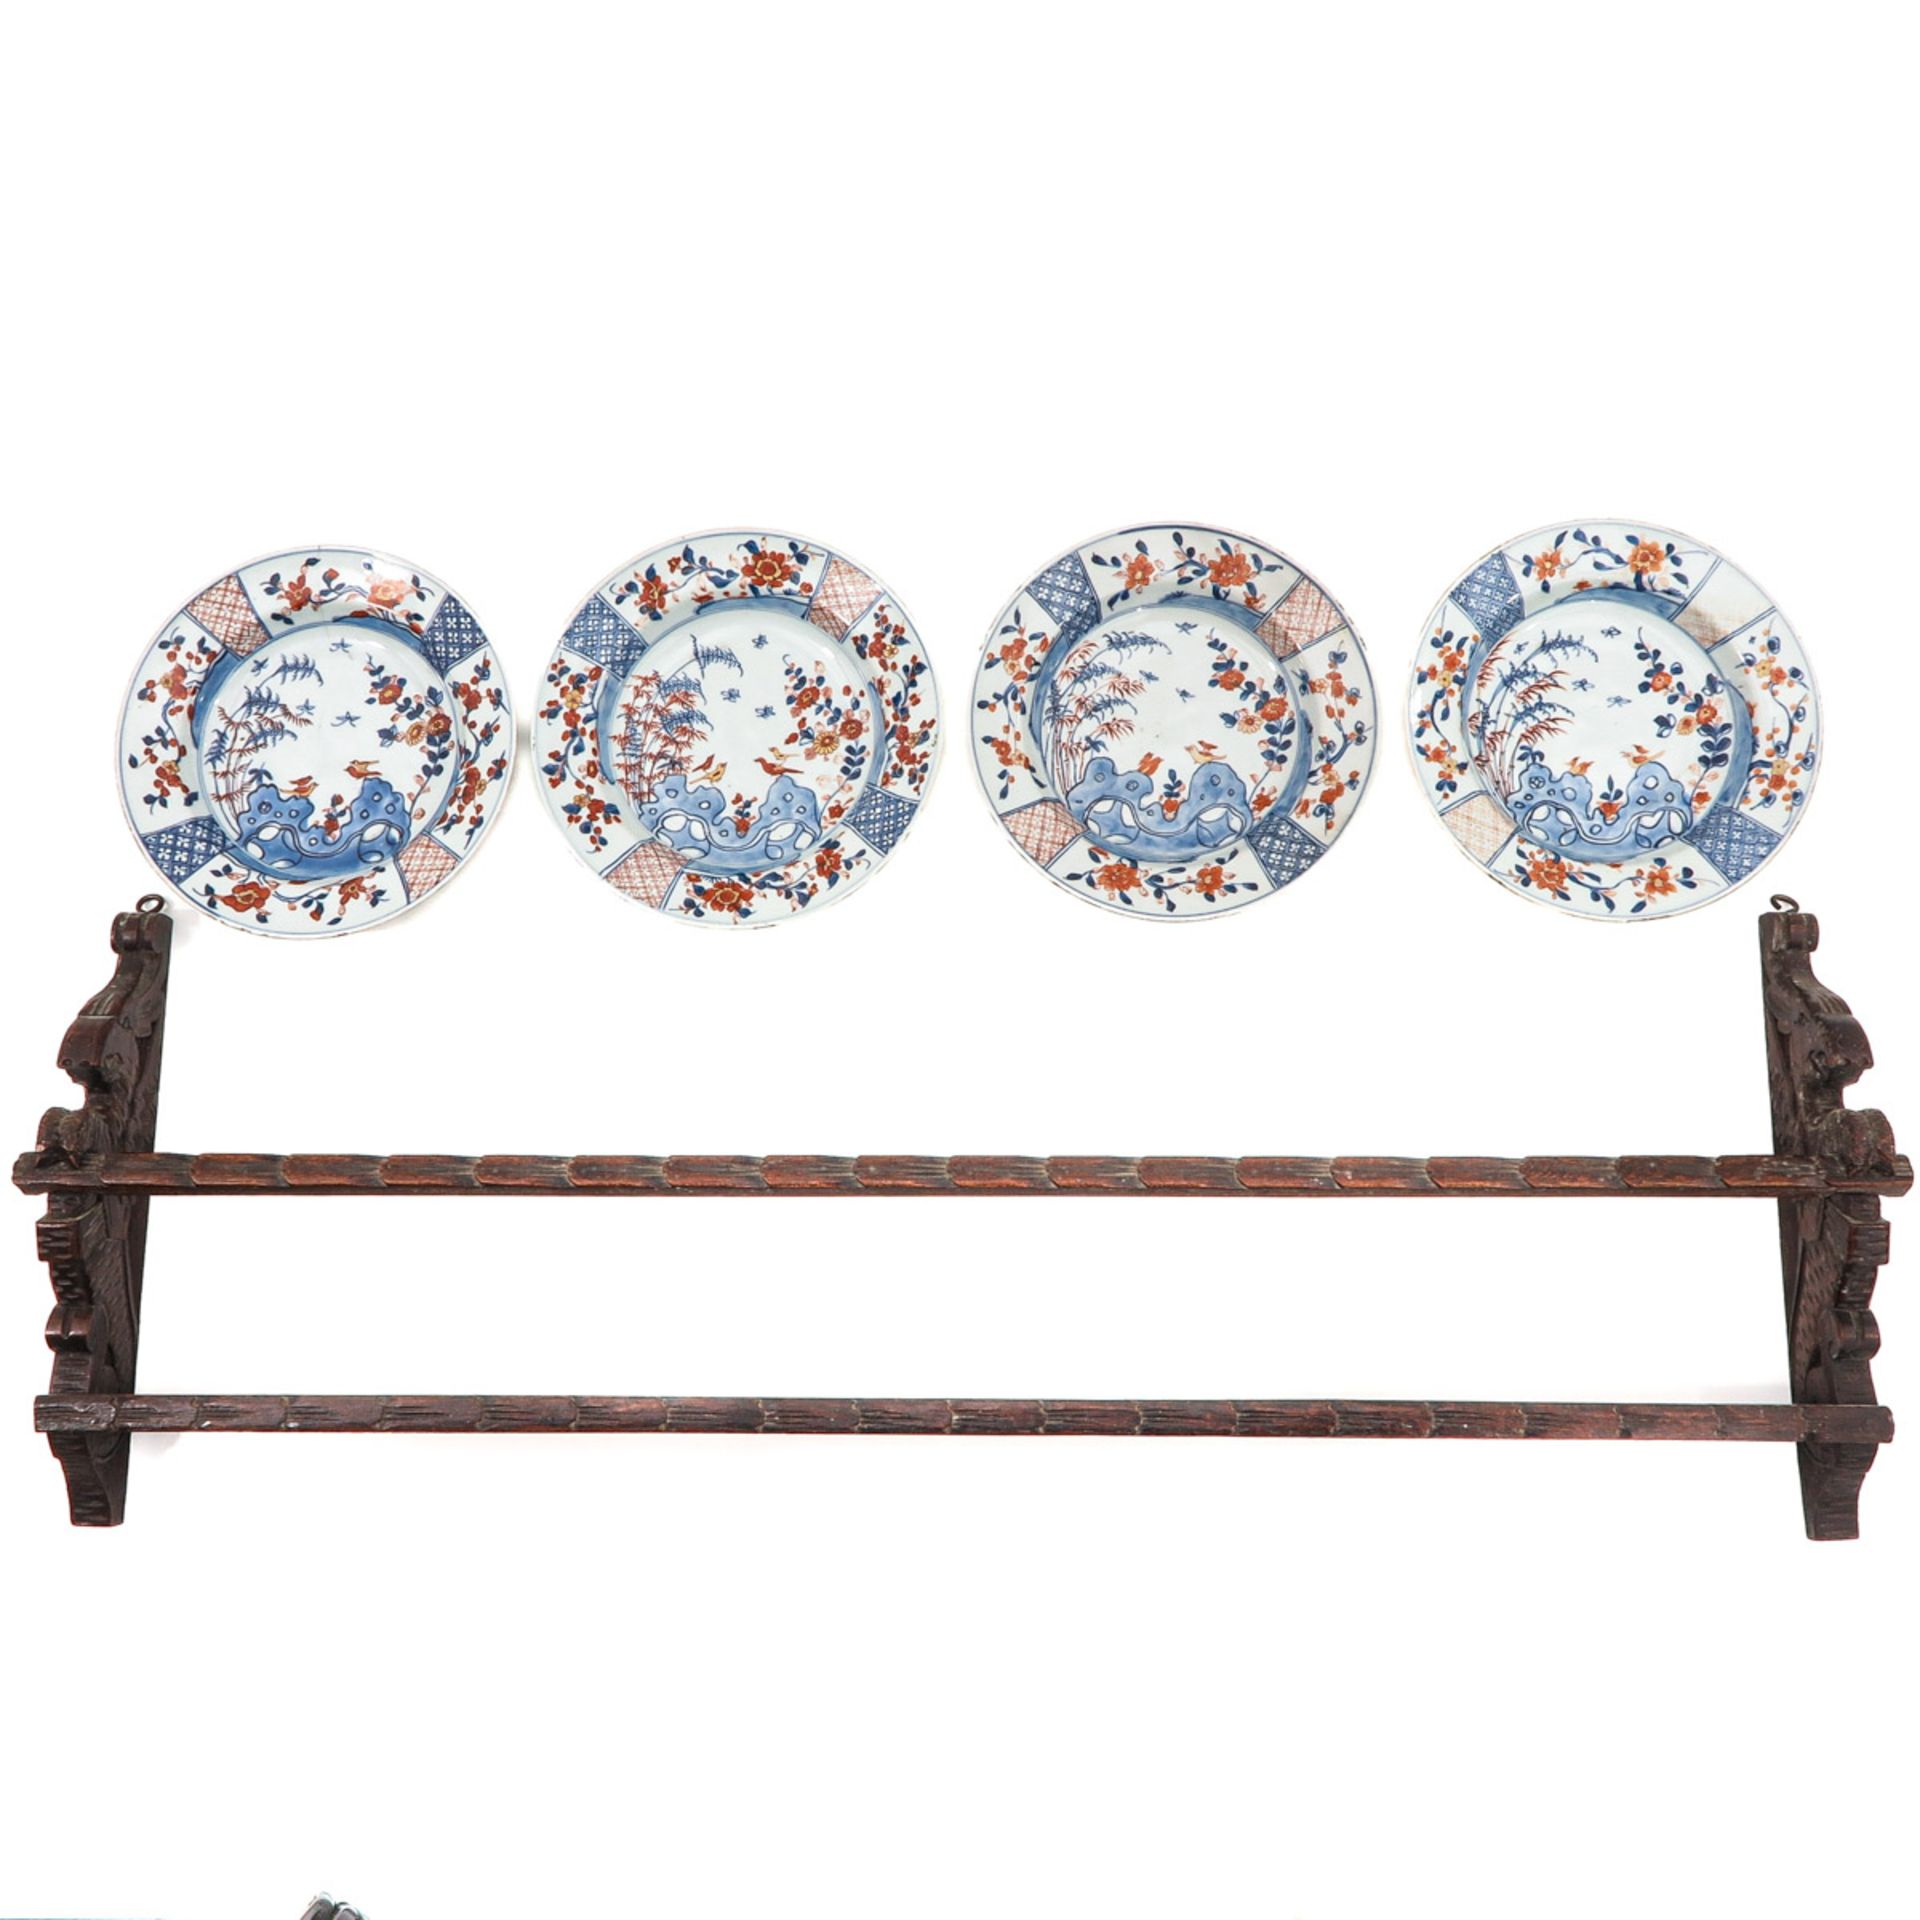 A Series of 4 Plates with Plate Rack